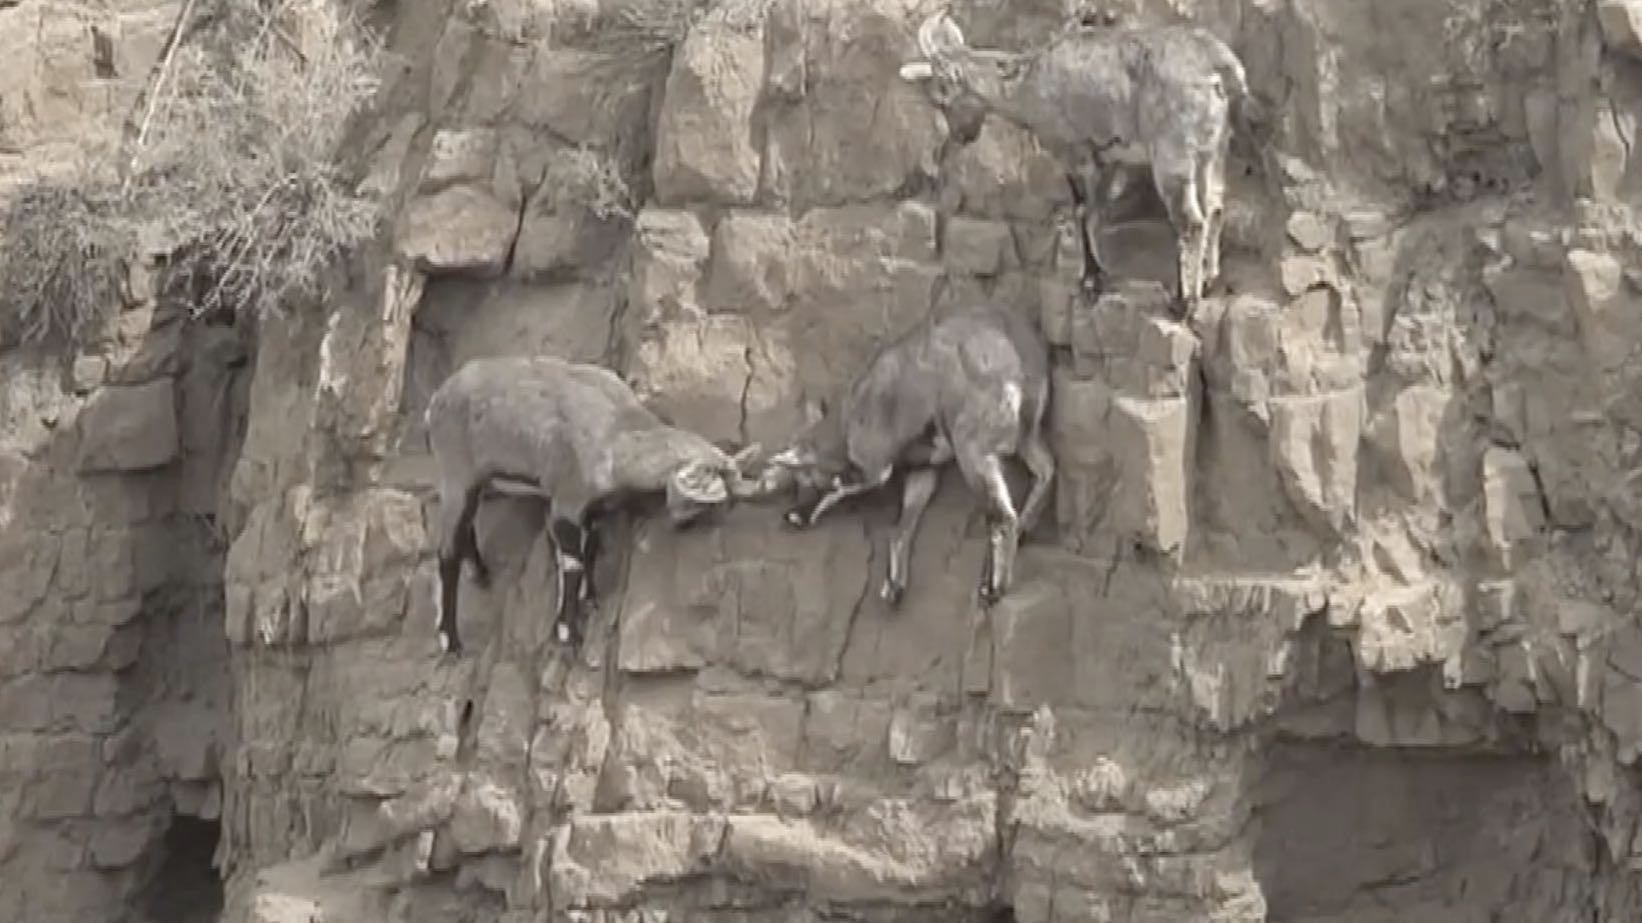 Blue sheep fight on cliff in Inner Mongolia